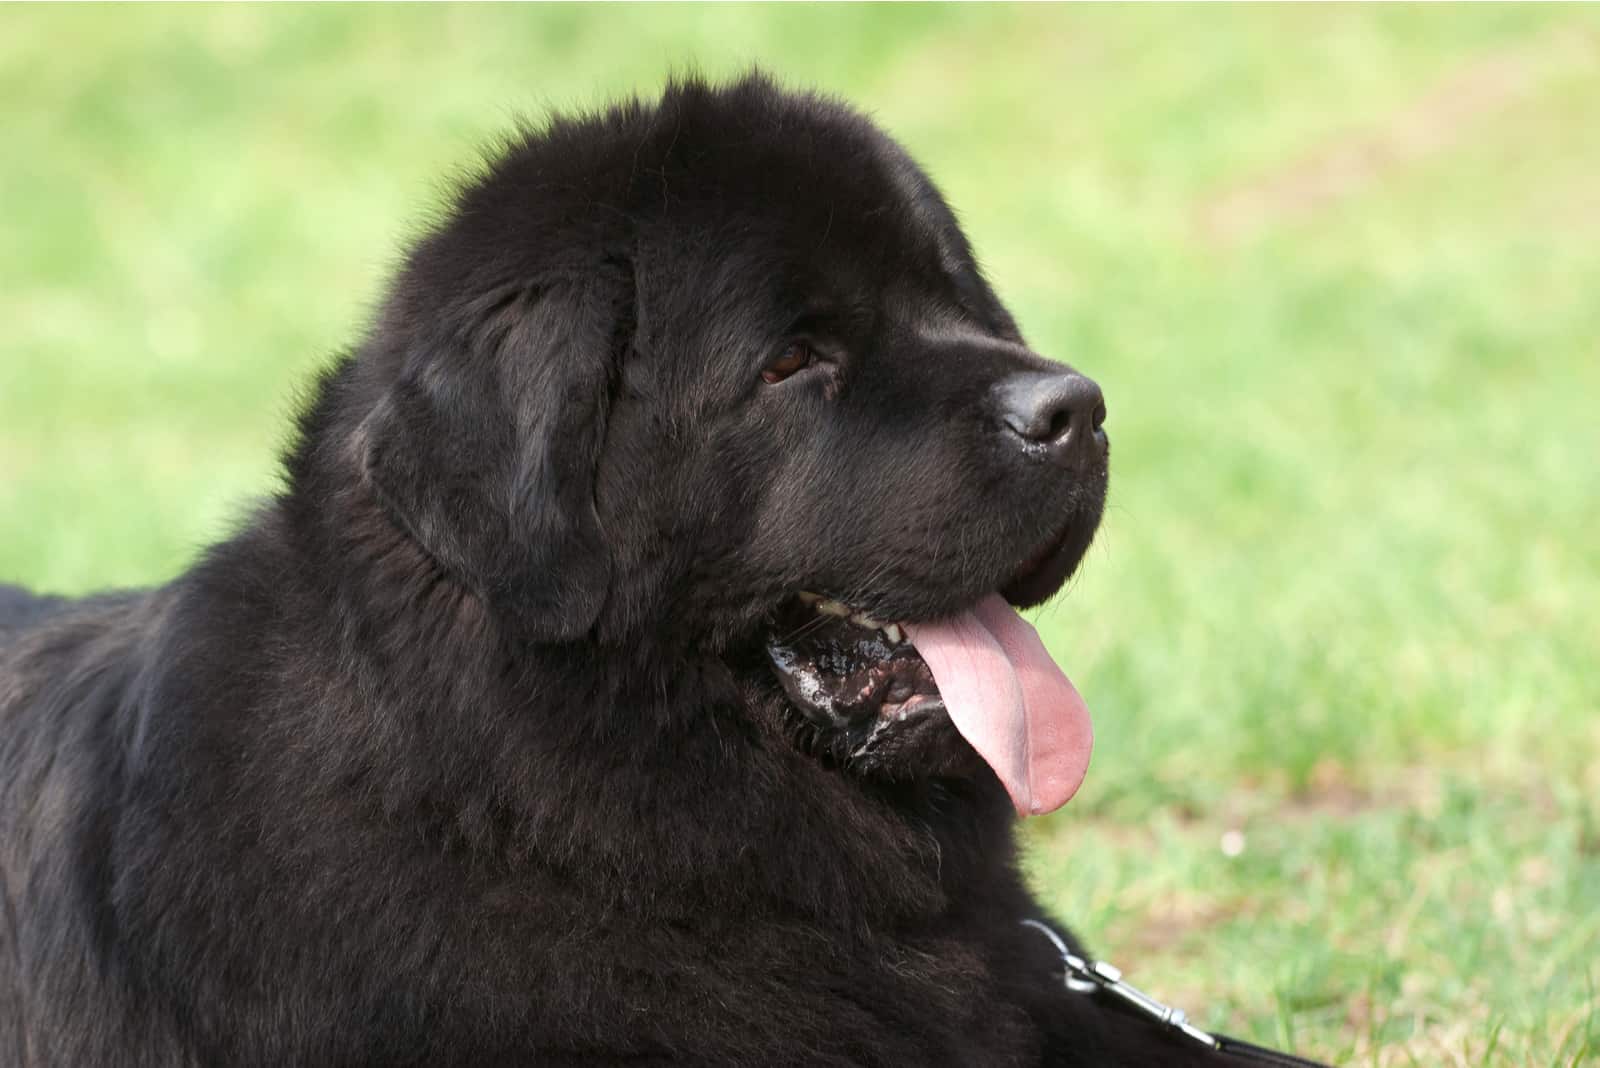 Newfoundland lies with its tongue out